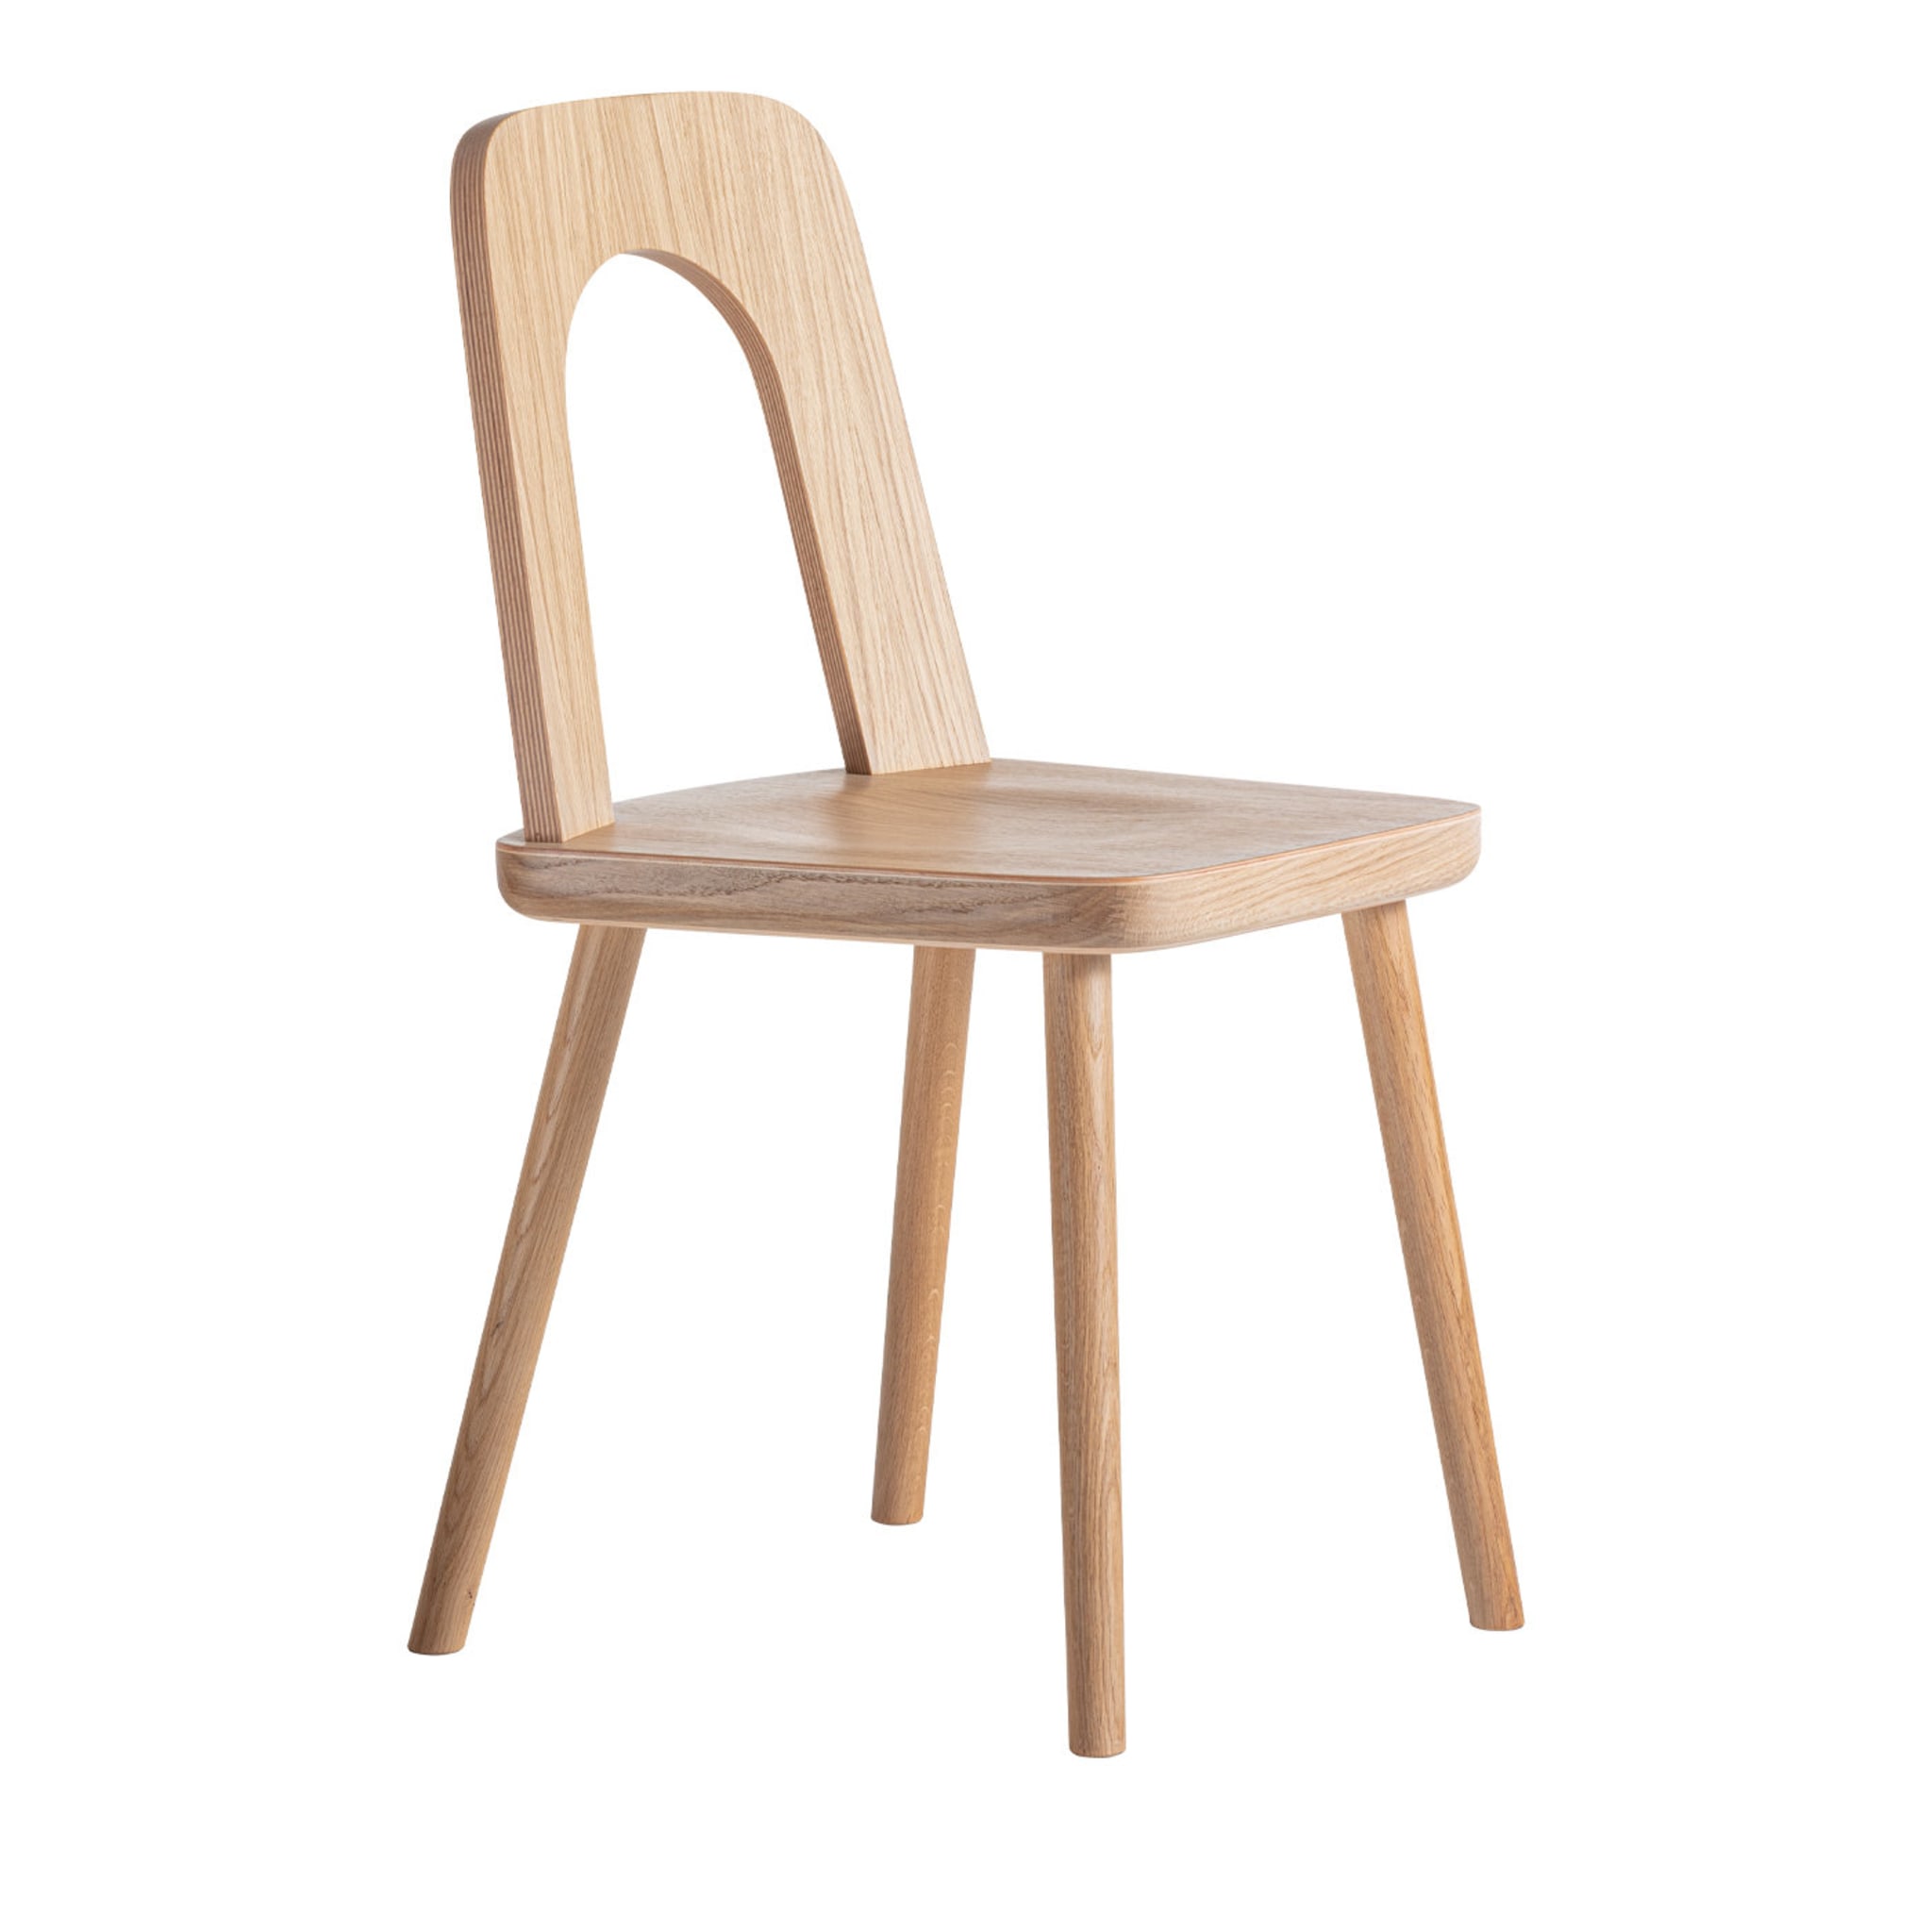 Set of 2 Natural Oak Arco Chairs - Main view